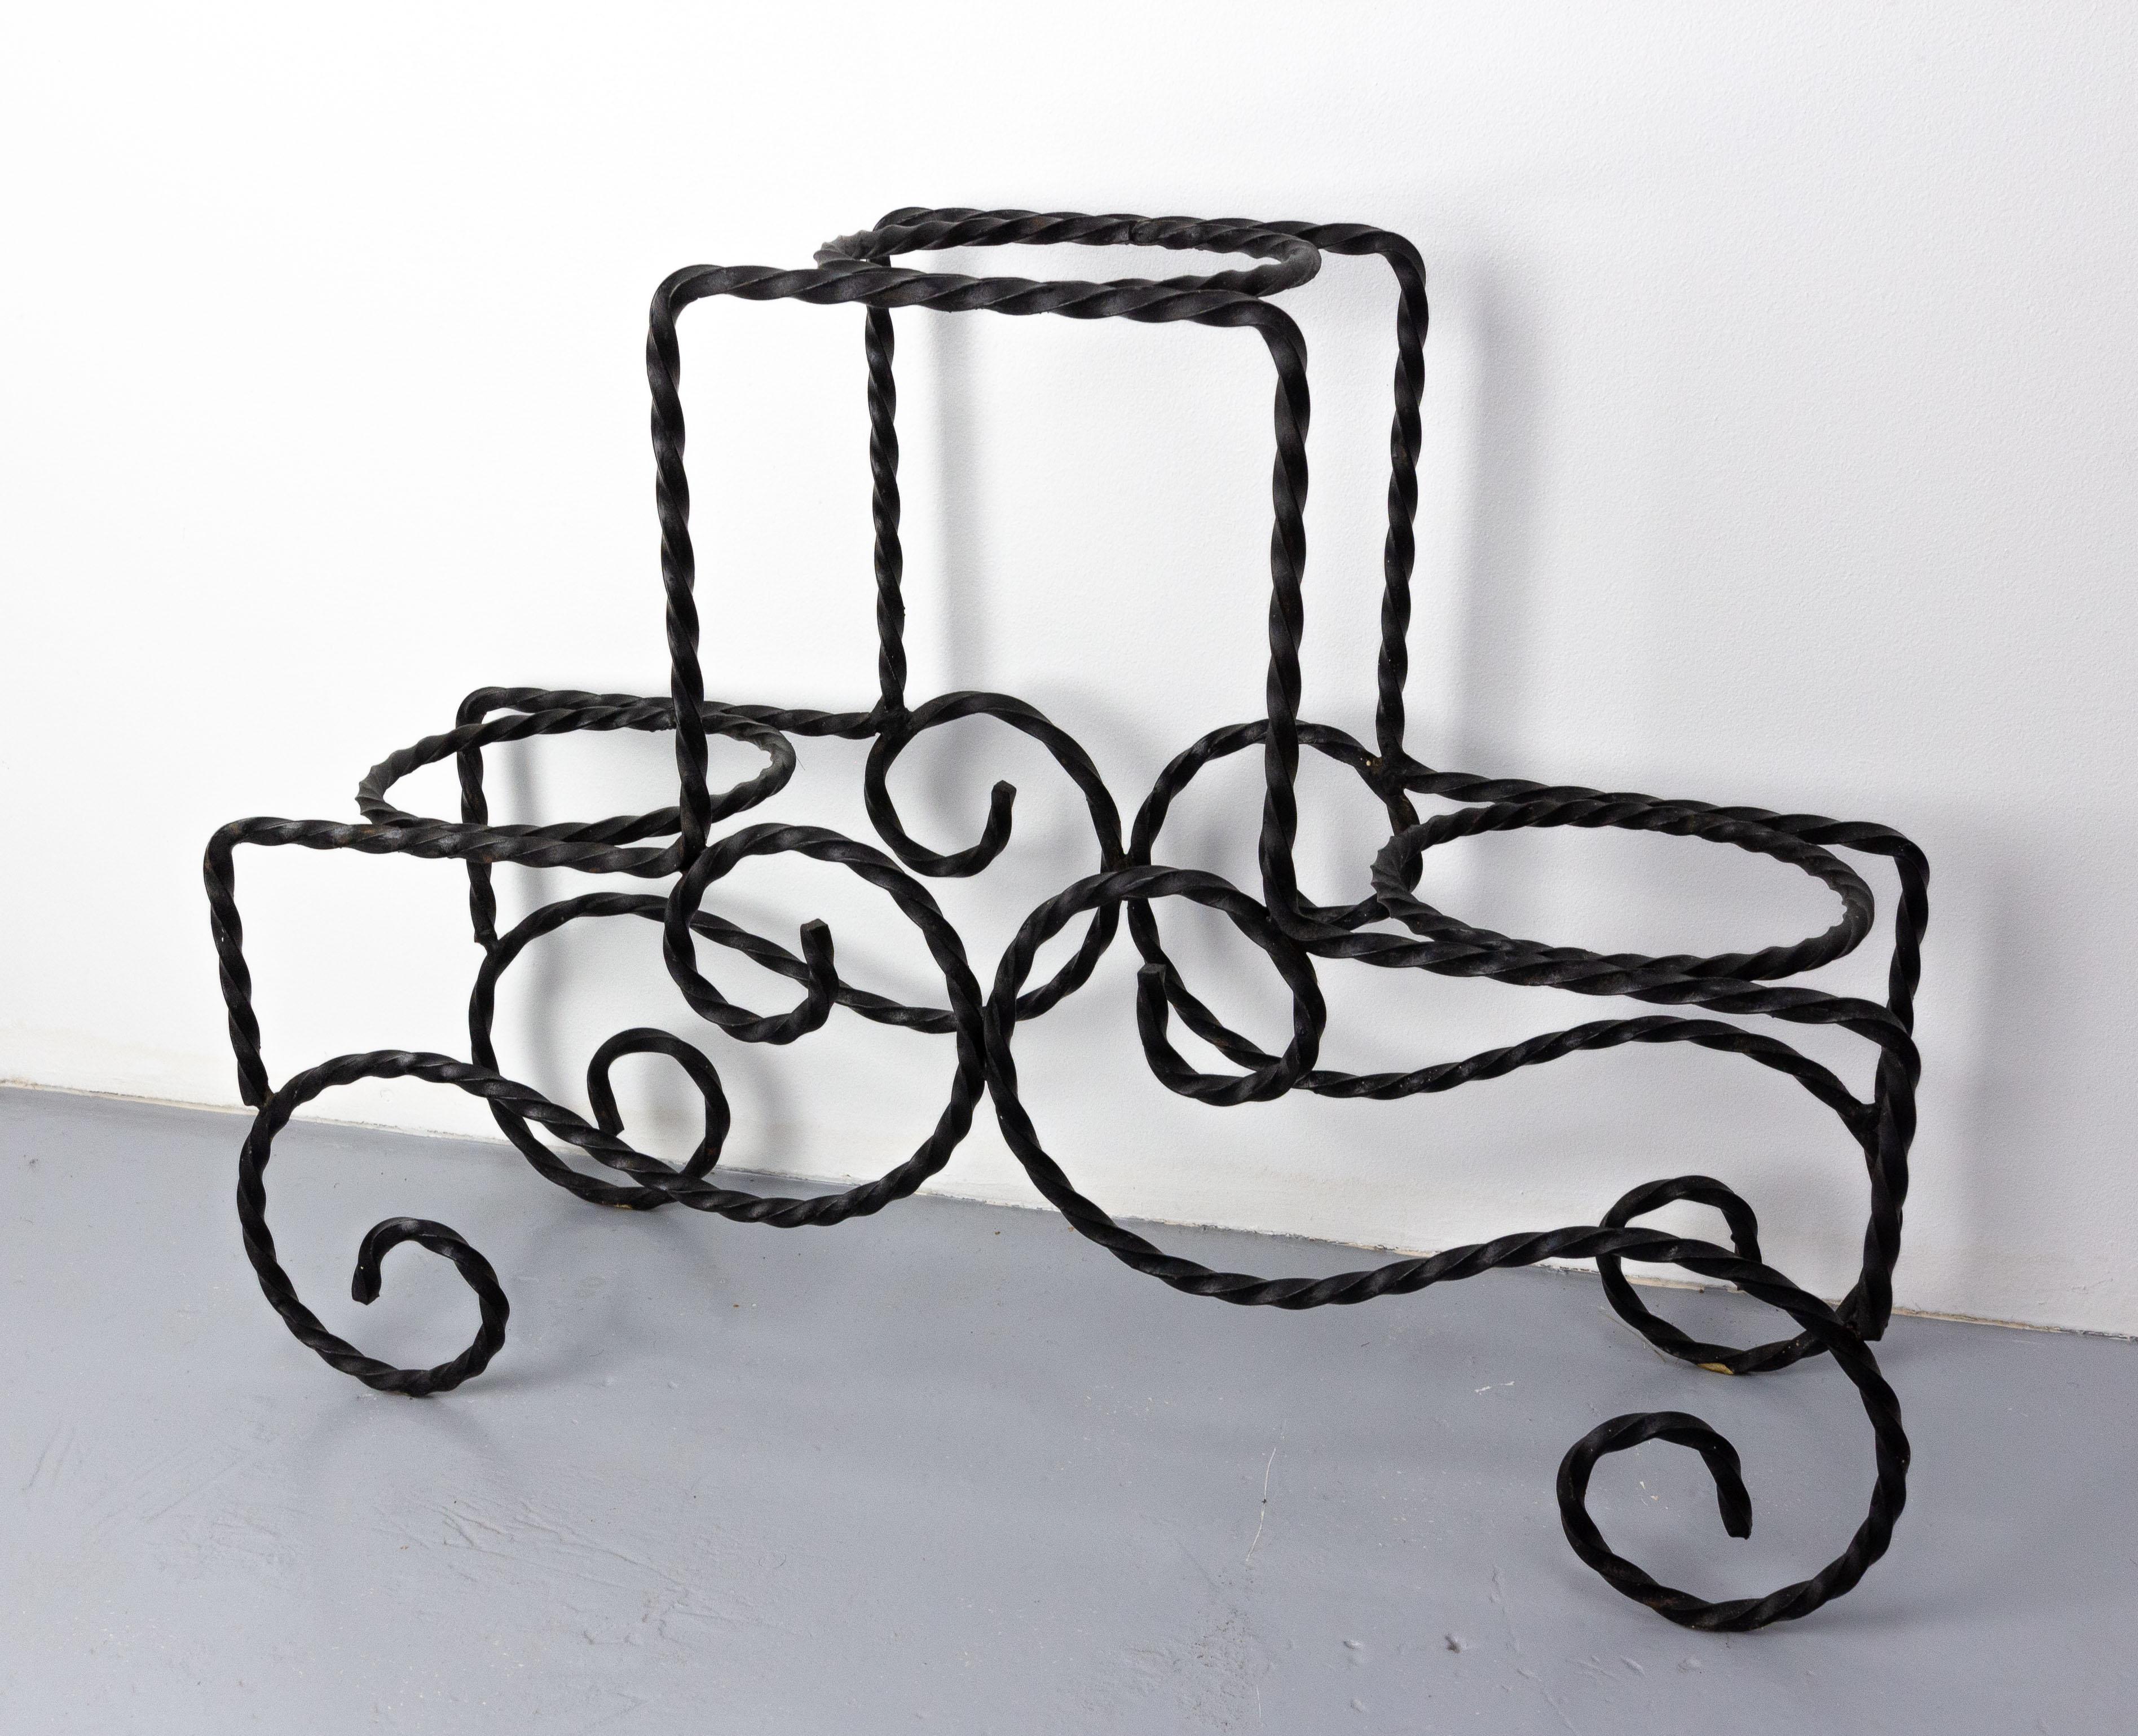 French Mid-Century Plant Holder Wrought Iron, circa 1960 For Sale 1